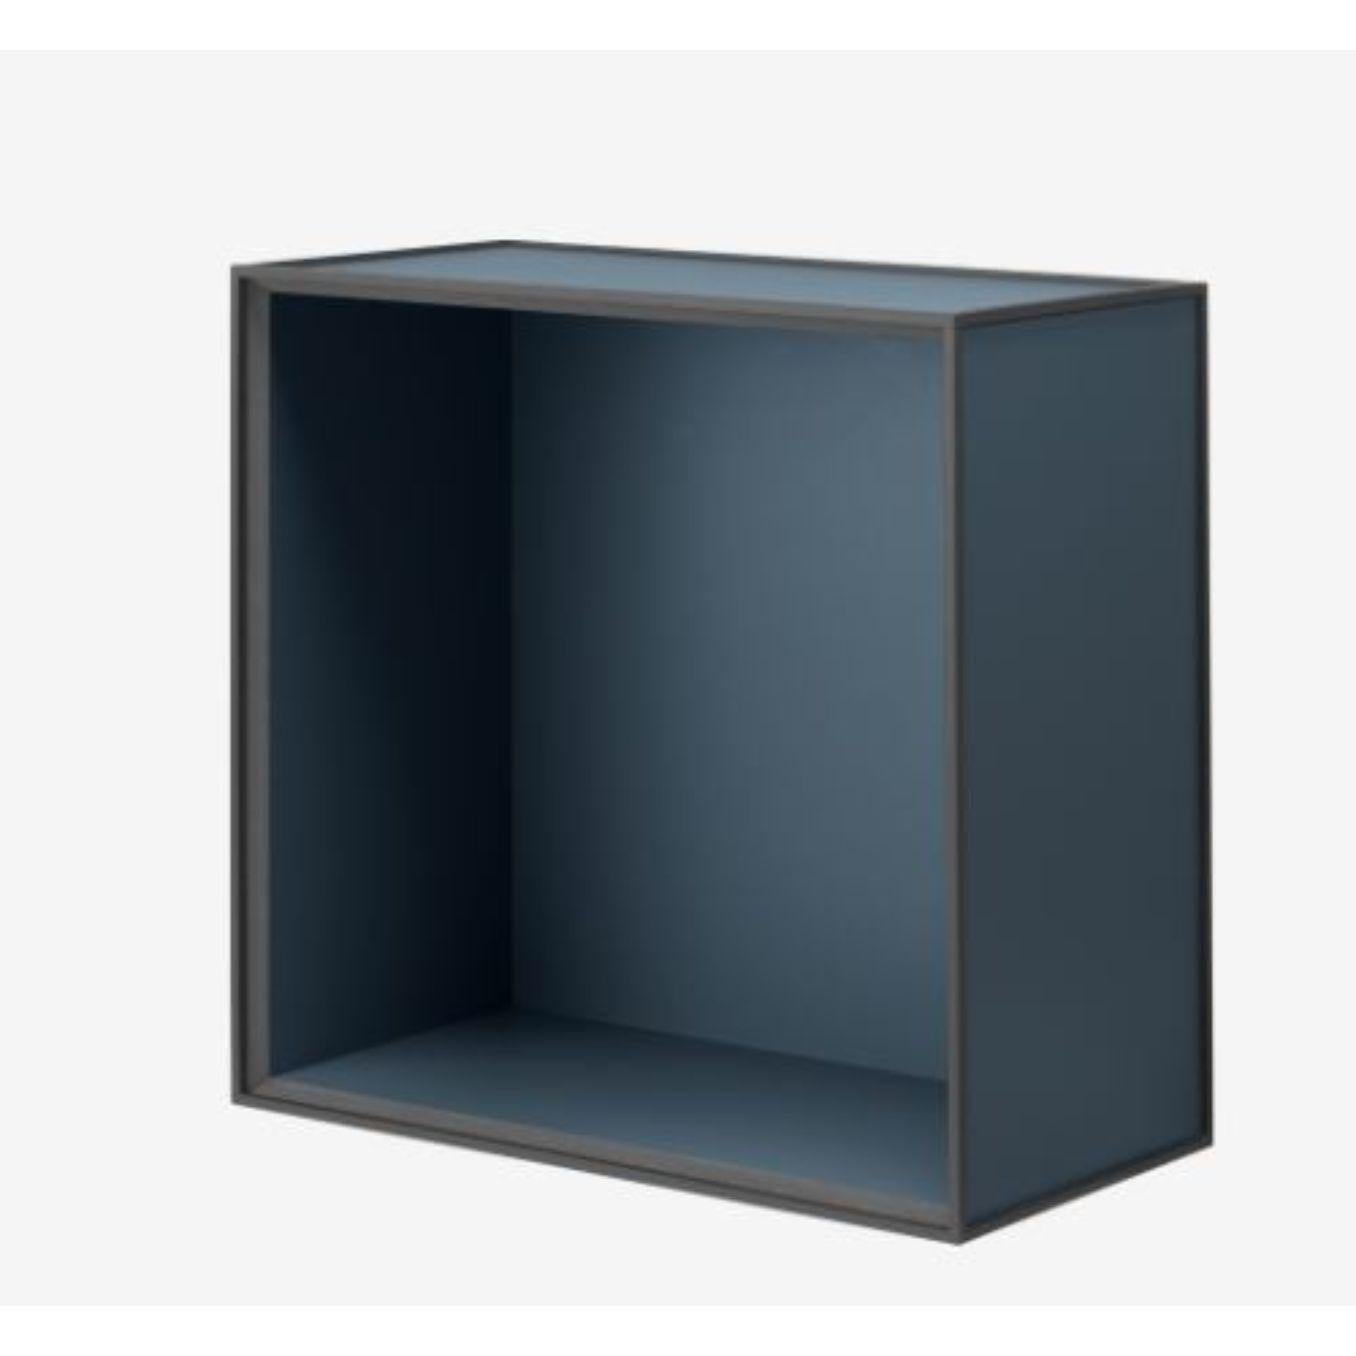 42 Fjord frame box by Lassen
Dimensions: D 42 x W 21 x H 42 cm 
Materials: finér, melamin, melamin, melamine, metal, veneer
Also available in different colours and dimensions.
Weight: 10.5 Kg


By Lassen is a Danish design brand focused on